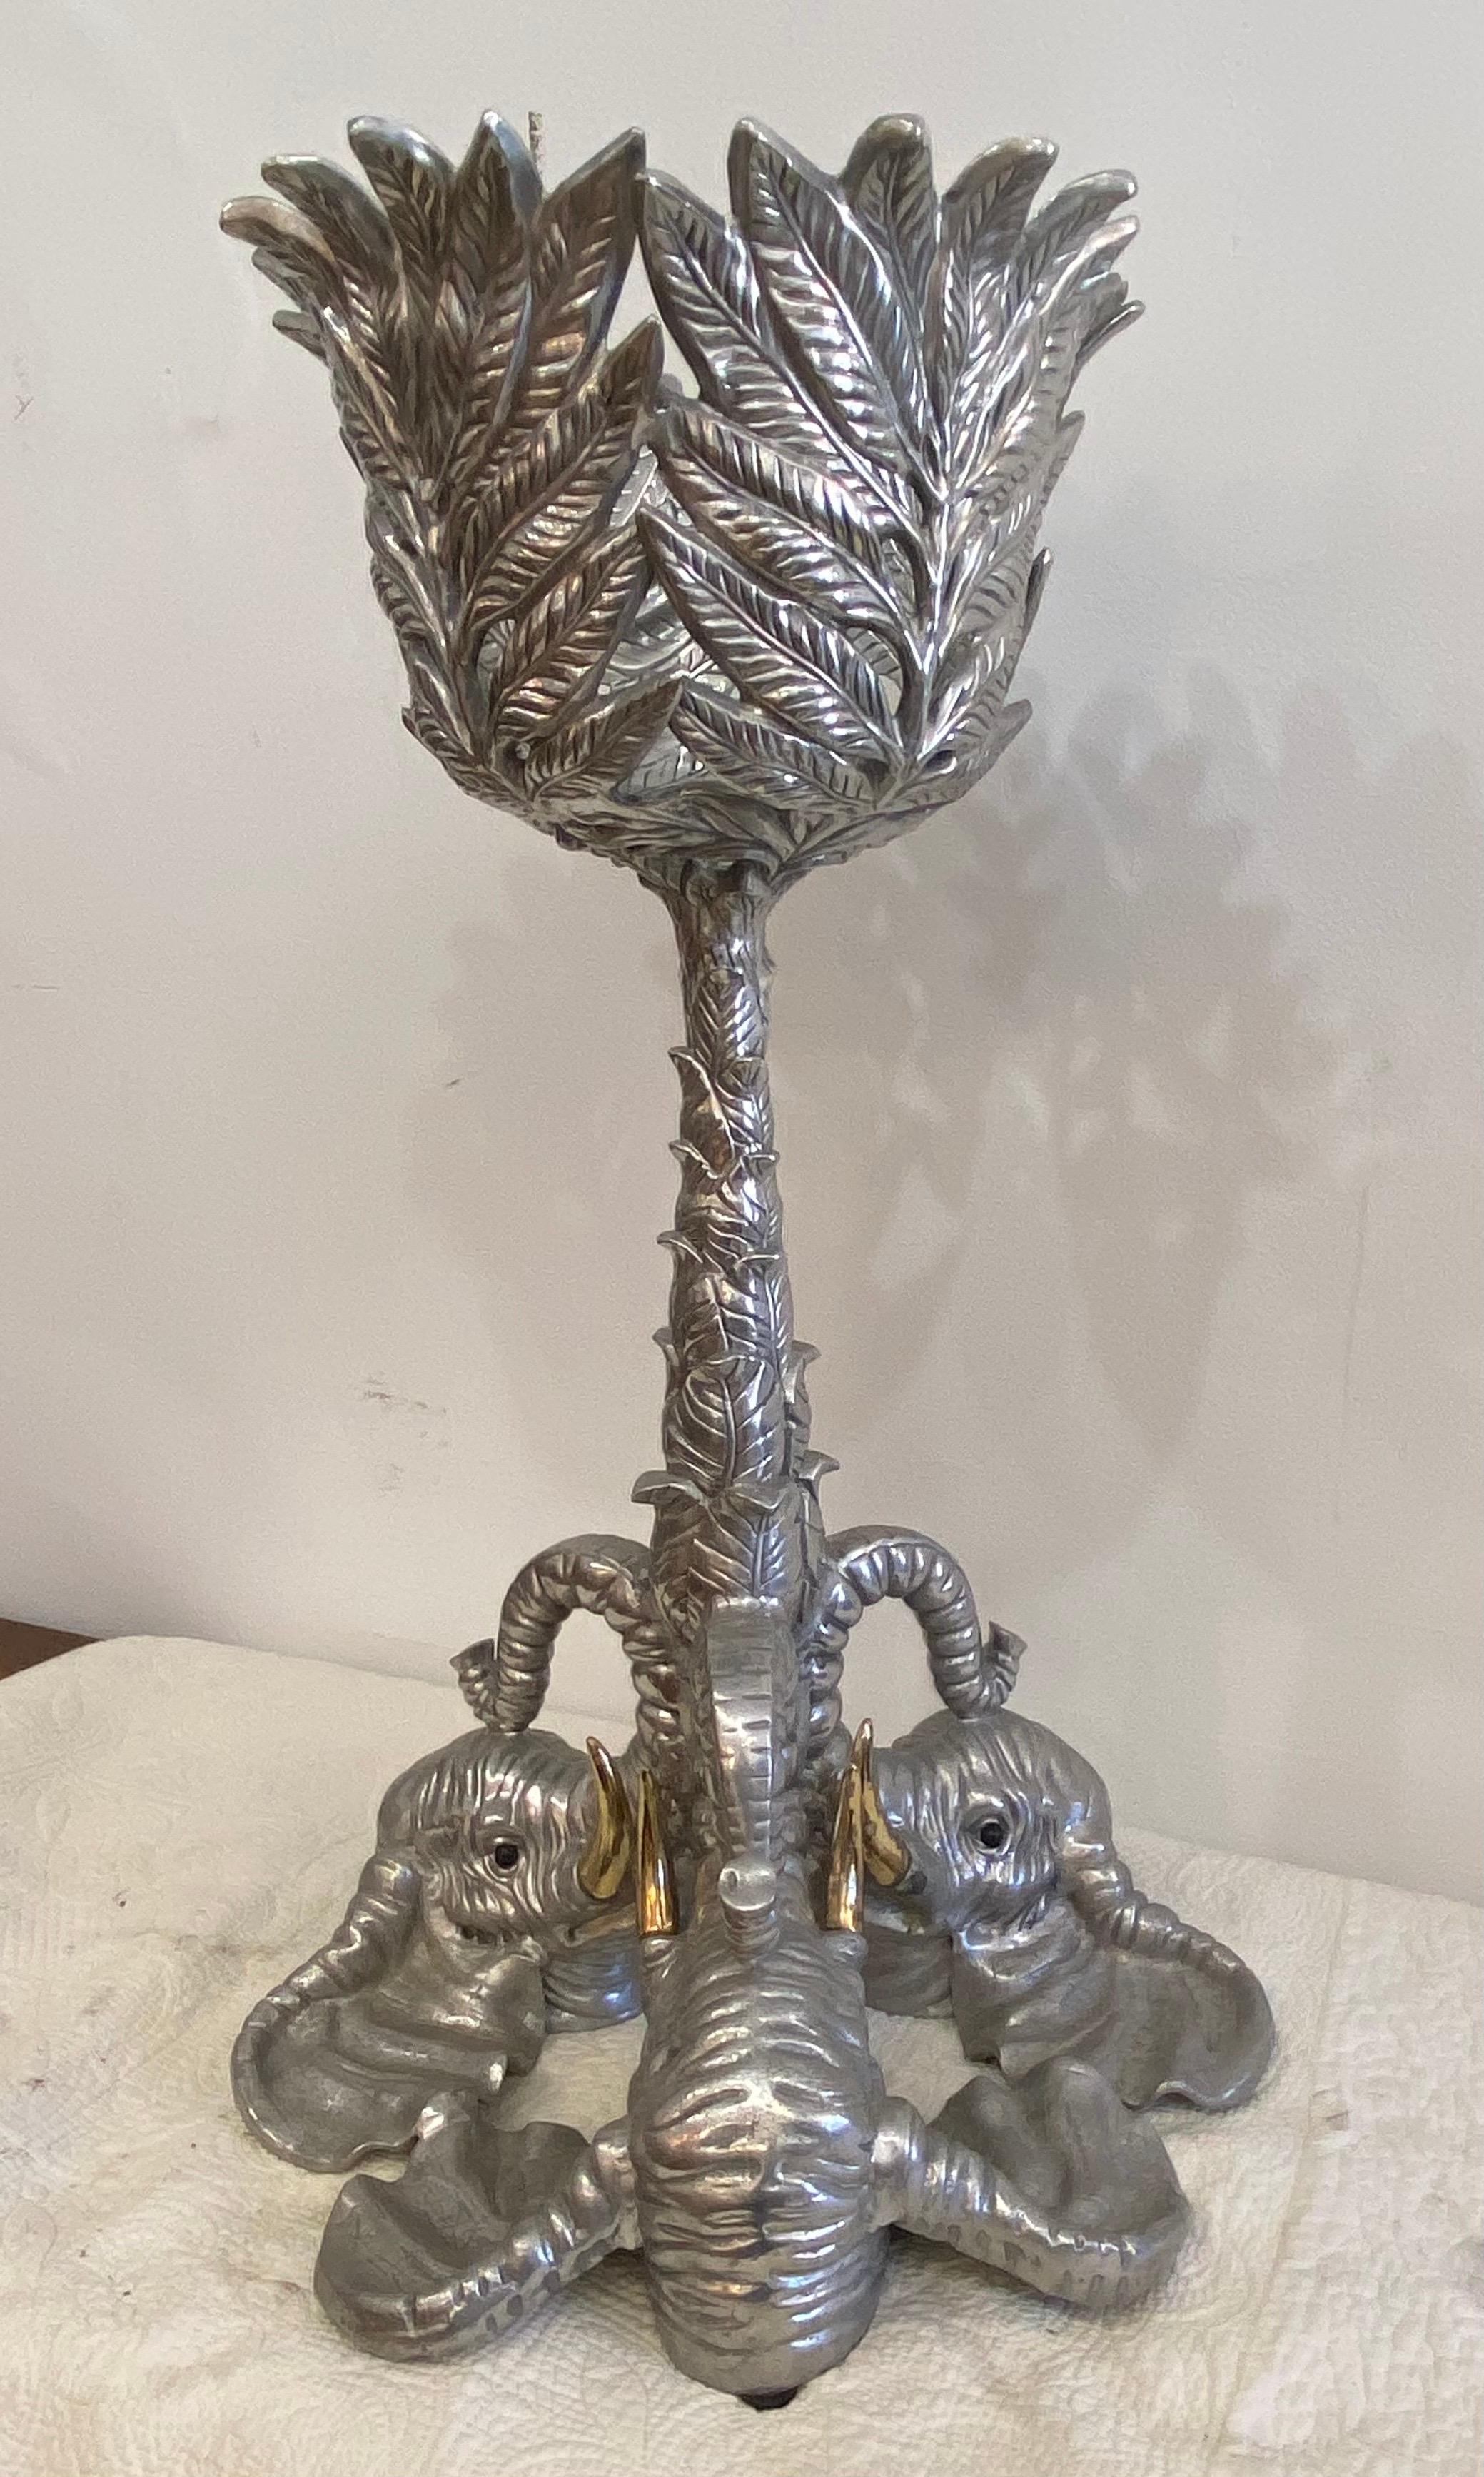 Free standing wine cooler stand made by Arthur Court. Three cast aluminum elephants with brass tusks supporting a floral stem. Tropical leaves surround at top.